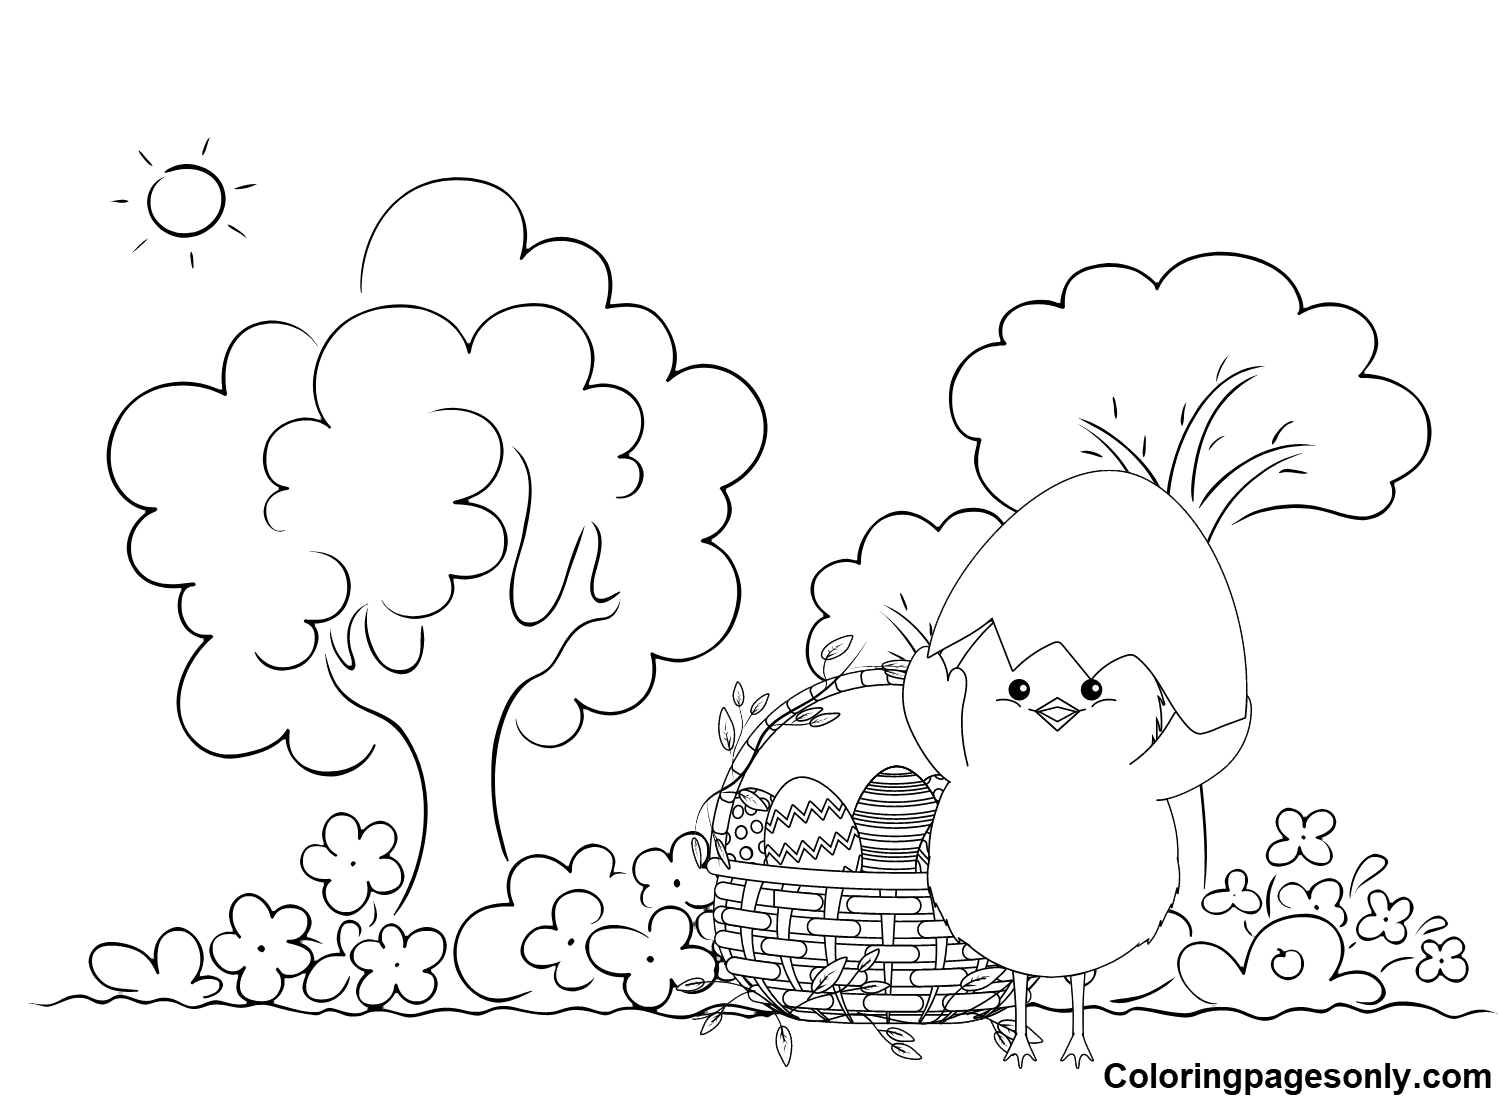 Easter Chick Images Coloring Page